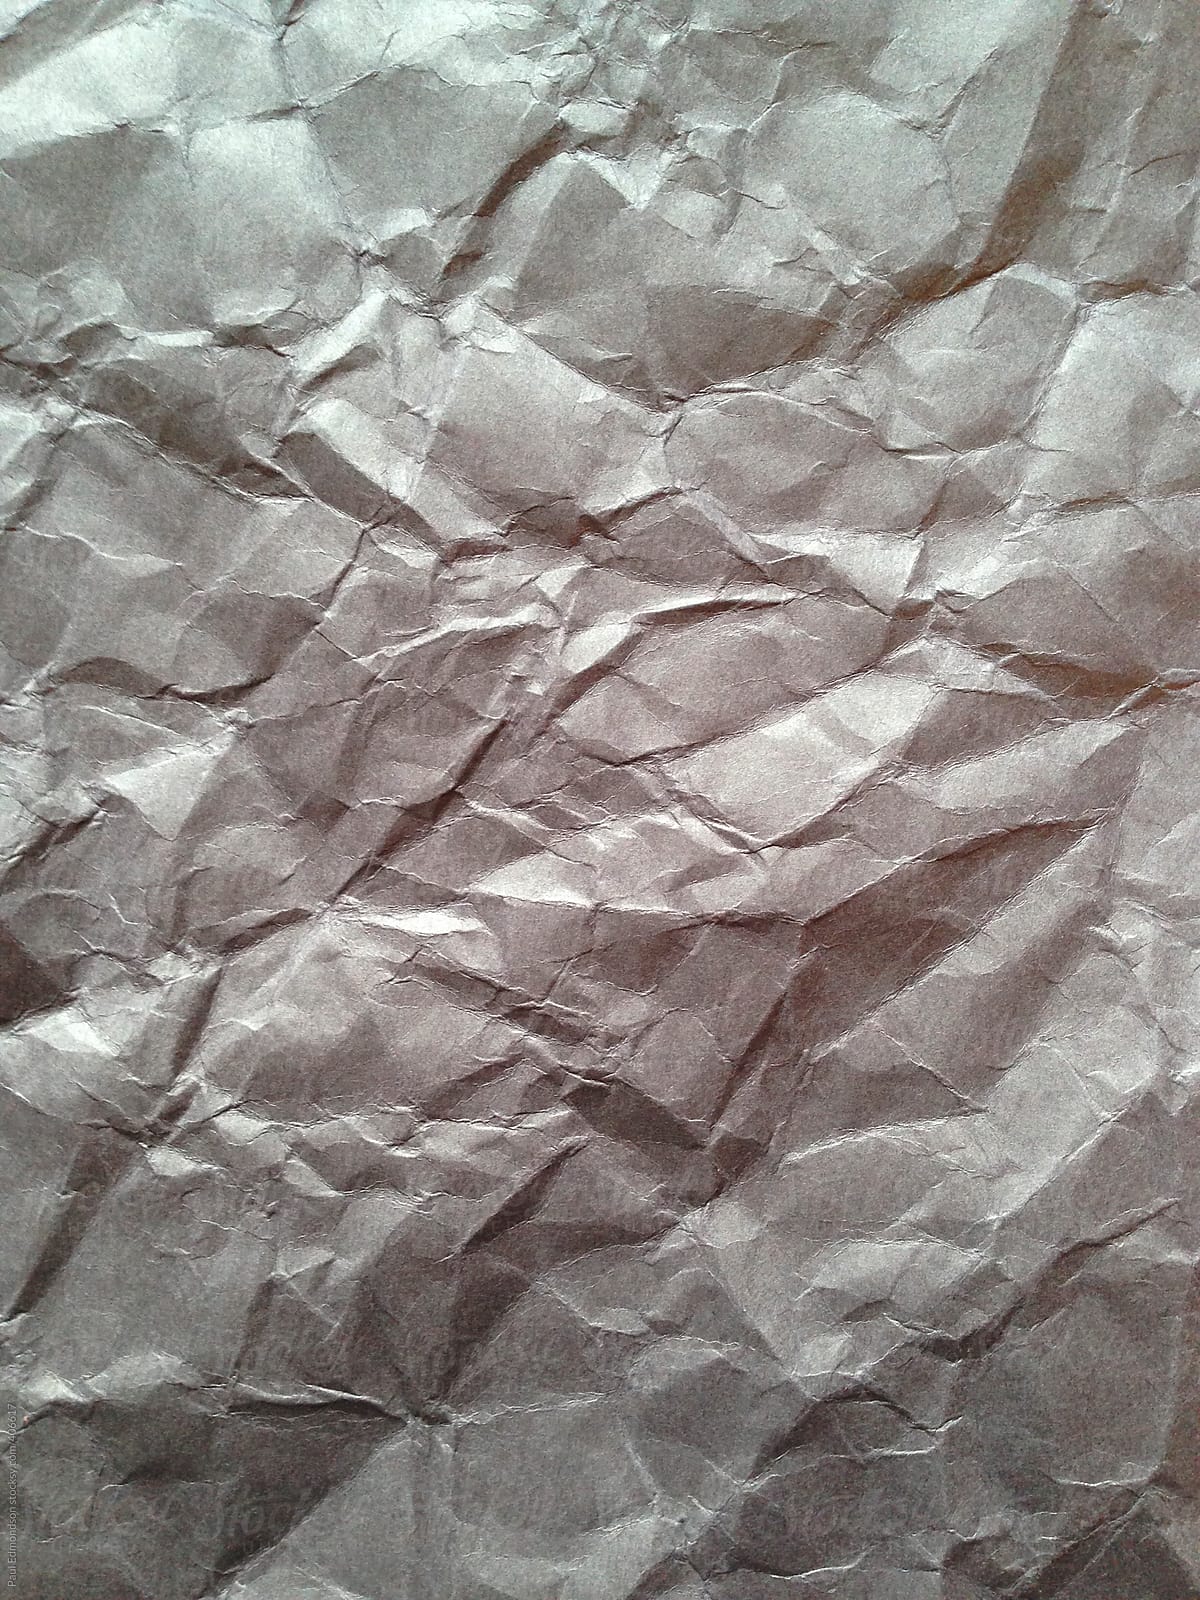 Close Up Of Crumpled Piece Of Construction Paper by Stocksy